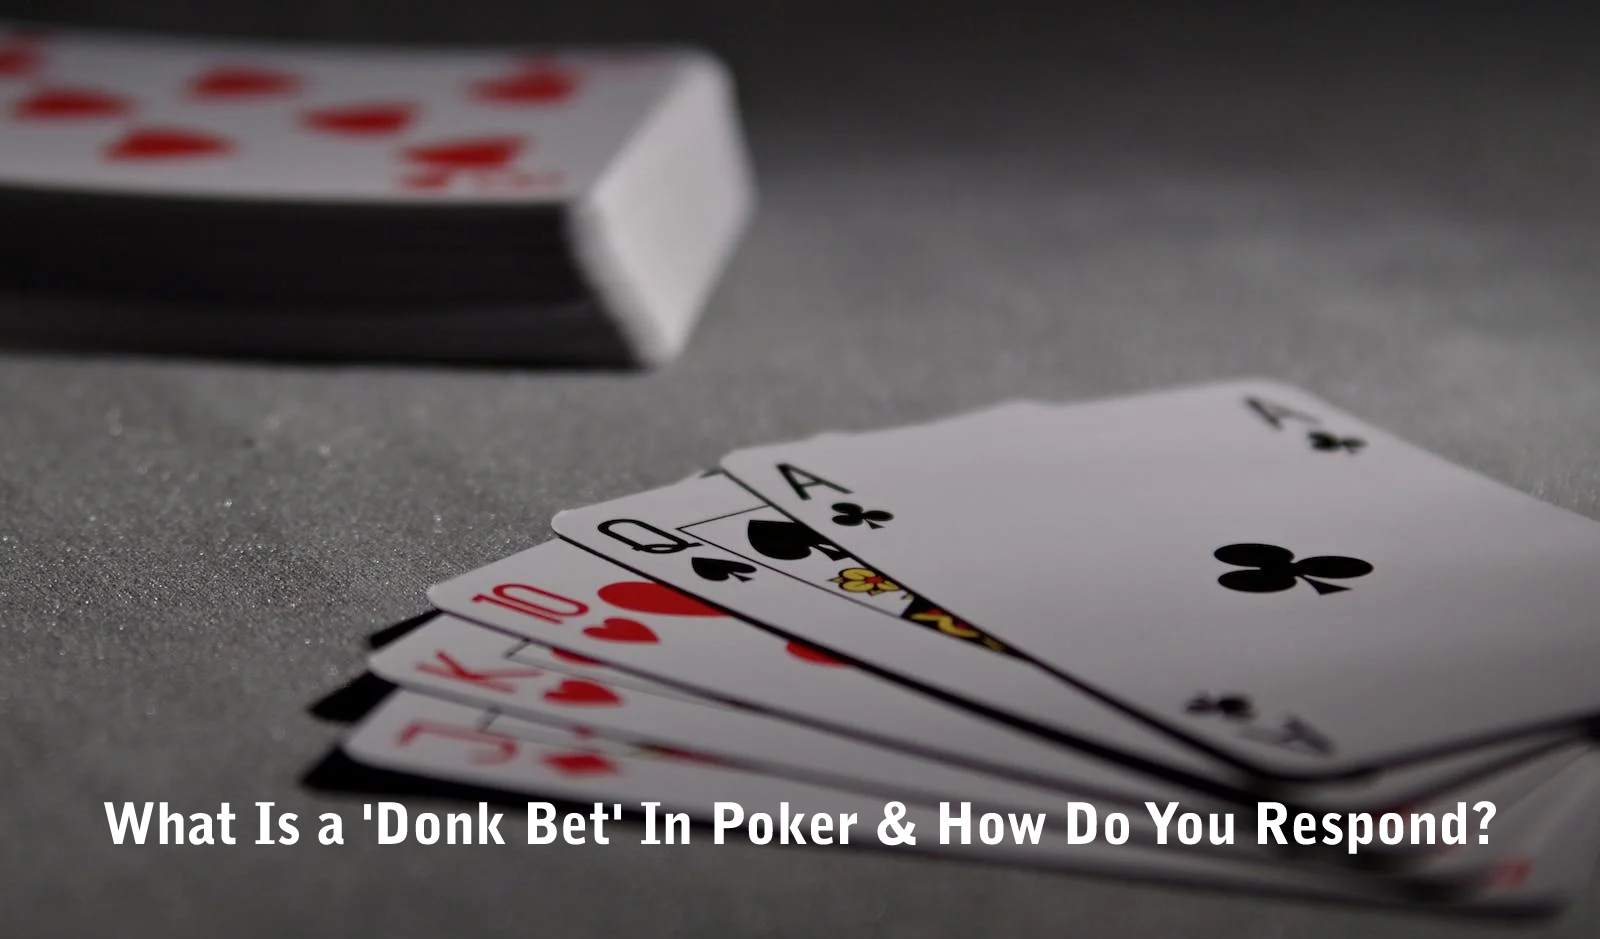 What Is a 'Donk Bet' In Poker & How Do You Respond?